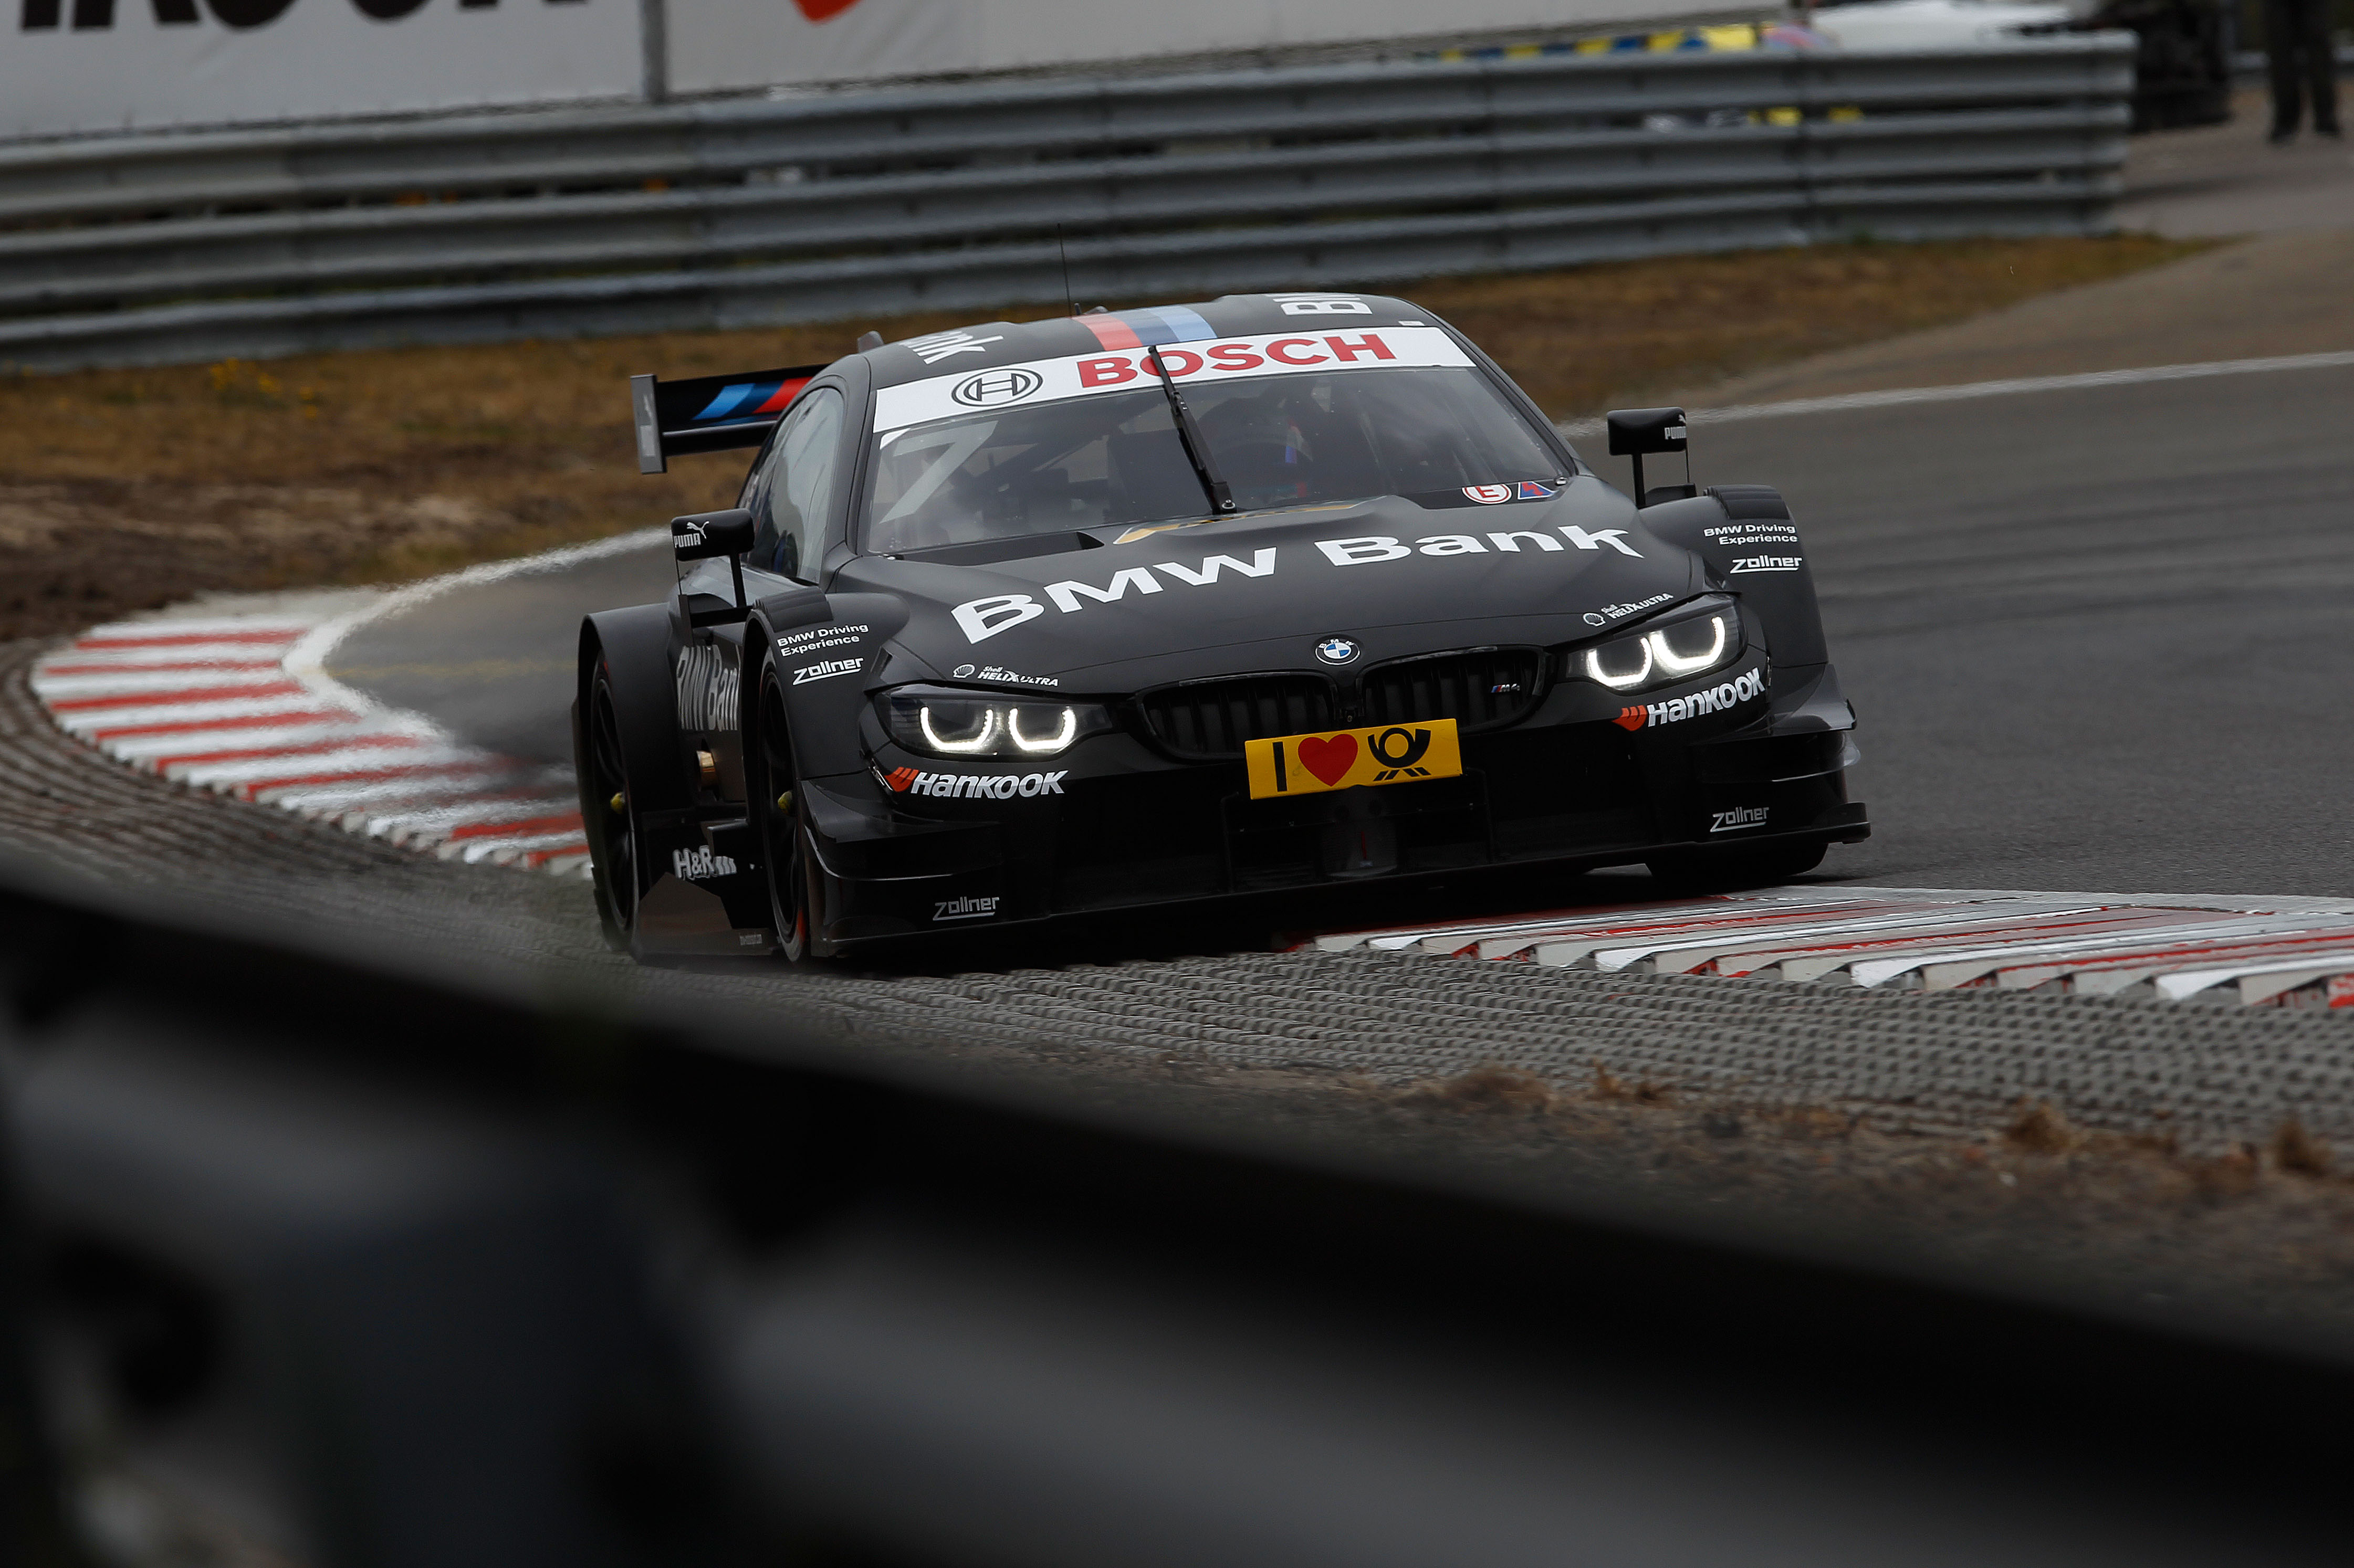 Zandvoort (NL) 12th July 2015. BMW Motorsport, Bruno Spengler (CA) BMW Bank M4 DTM. This image is copyright free for editorial use © BMW AG (07/2015).